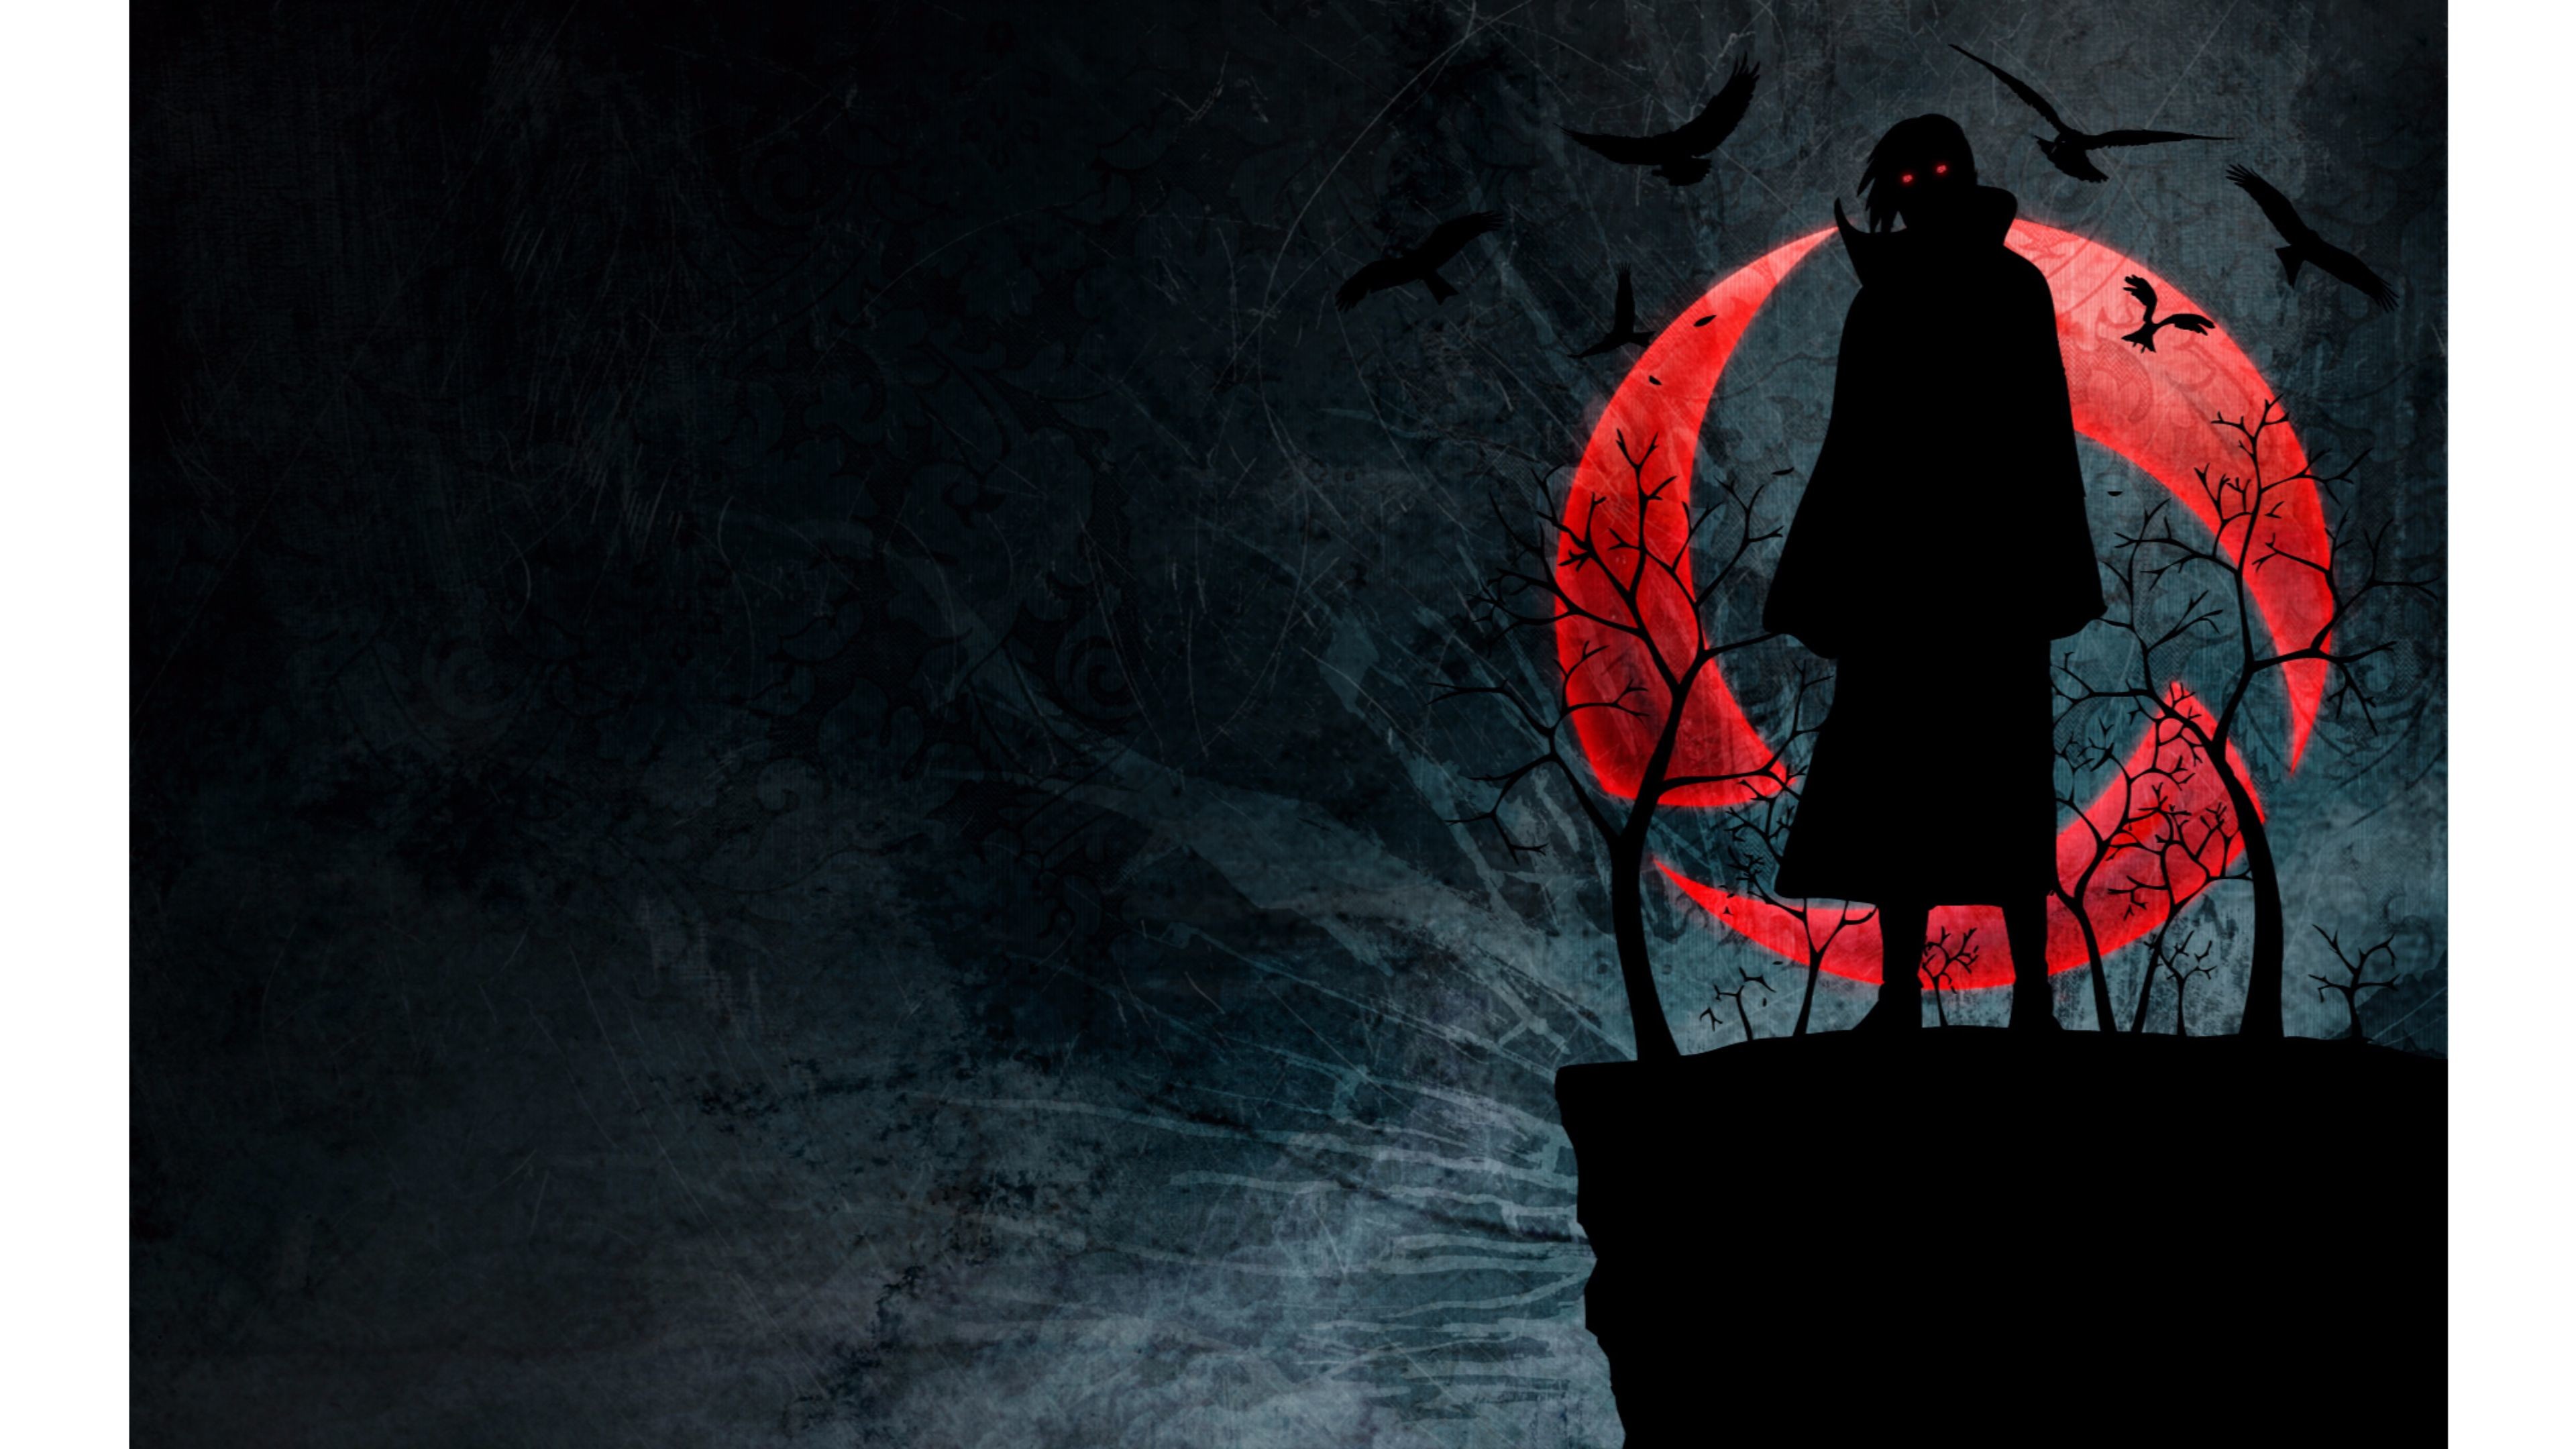 4k horror wallpaper,red,darkness,fictional character,illustration,graphic design